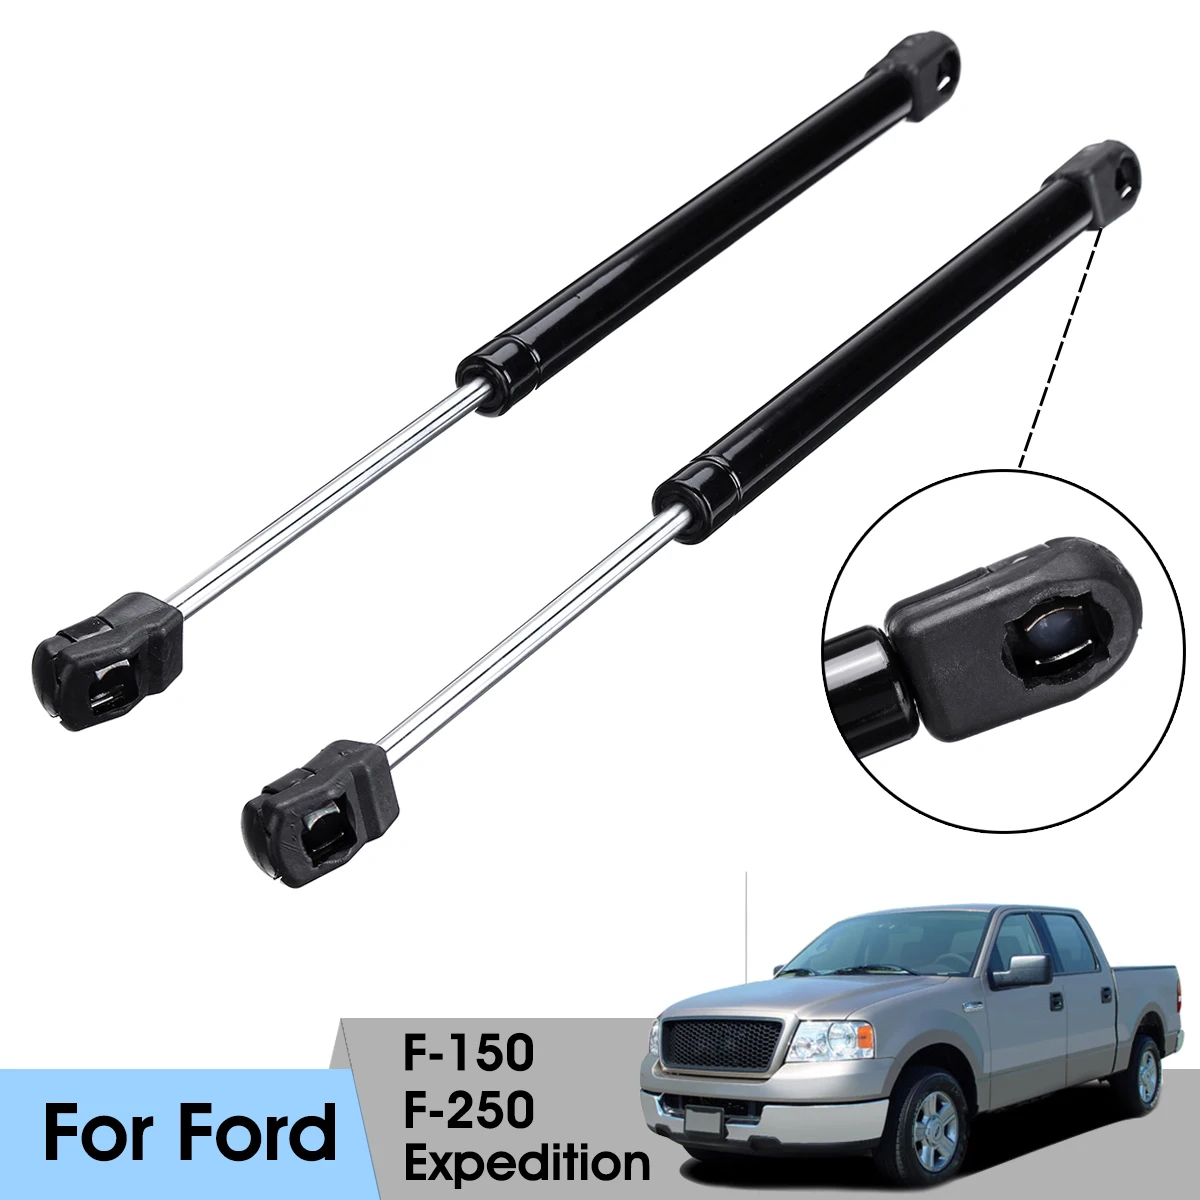 

2 PCS Front Hood Lift Support Spring Shocks Struts For 1997-2006 Ford Expedition/ F-150/ F-250 4578